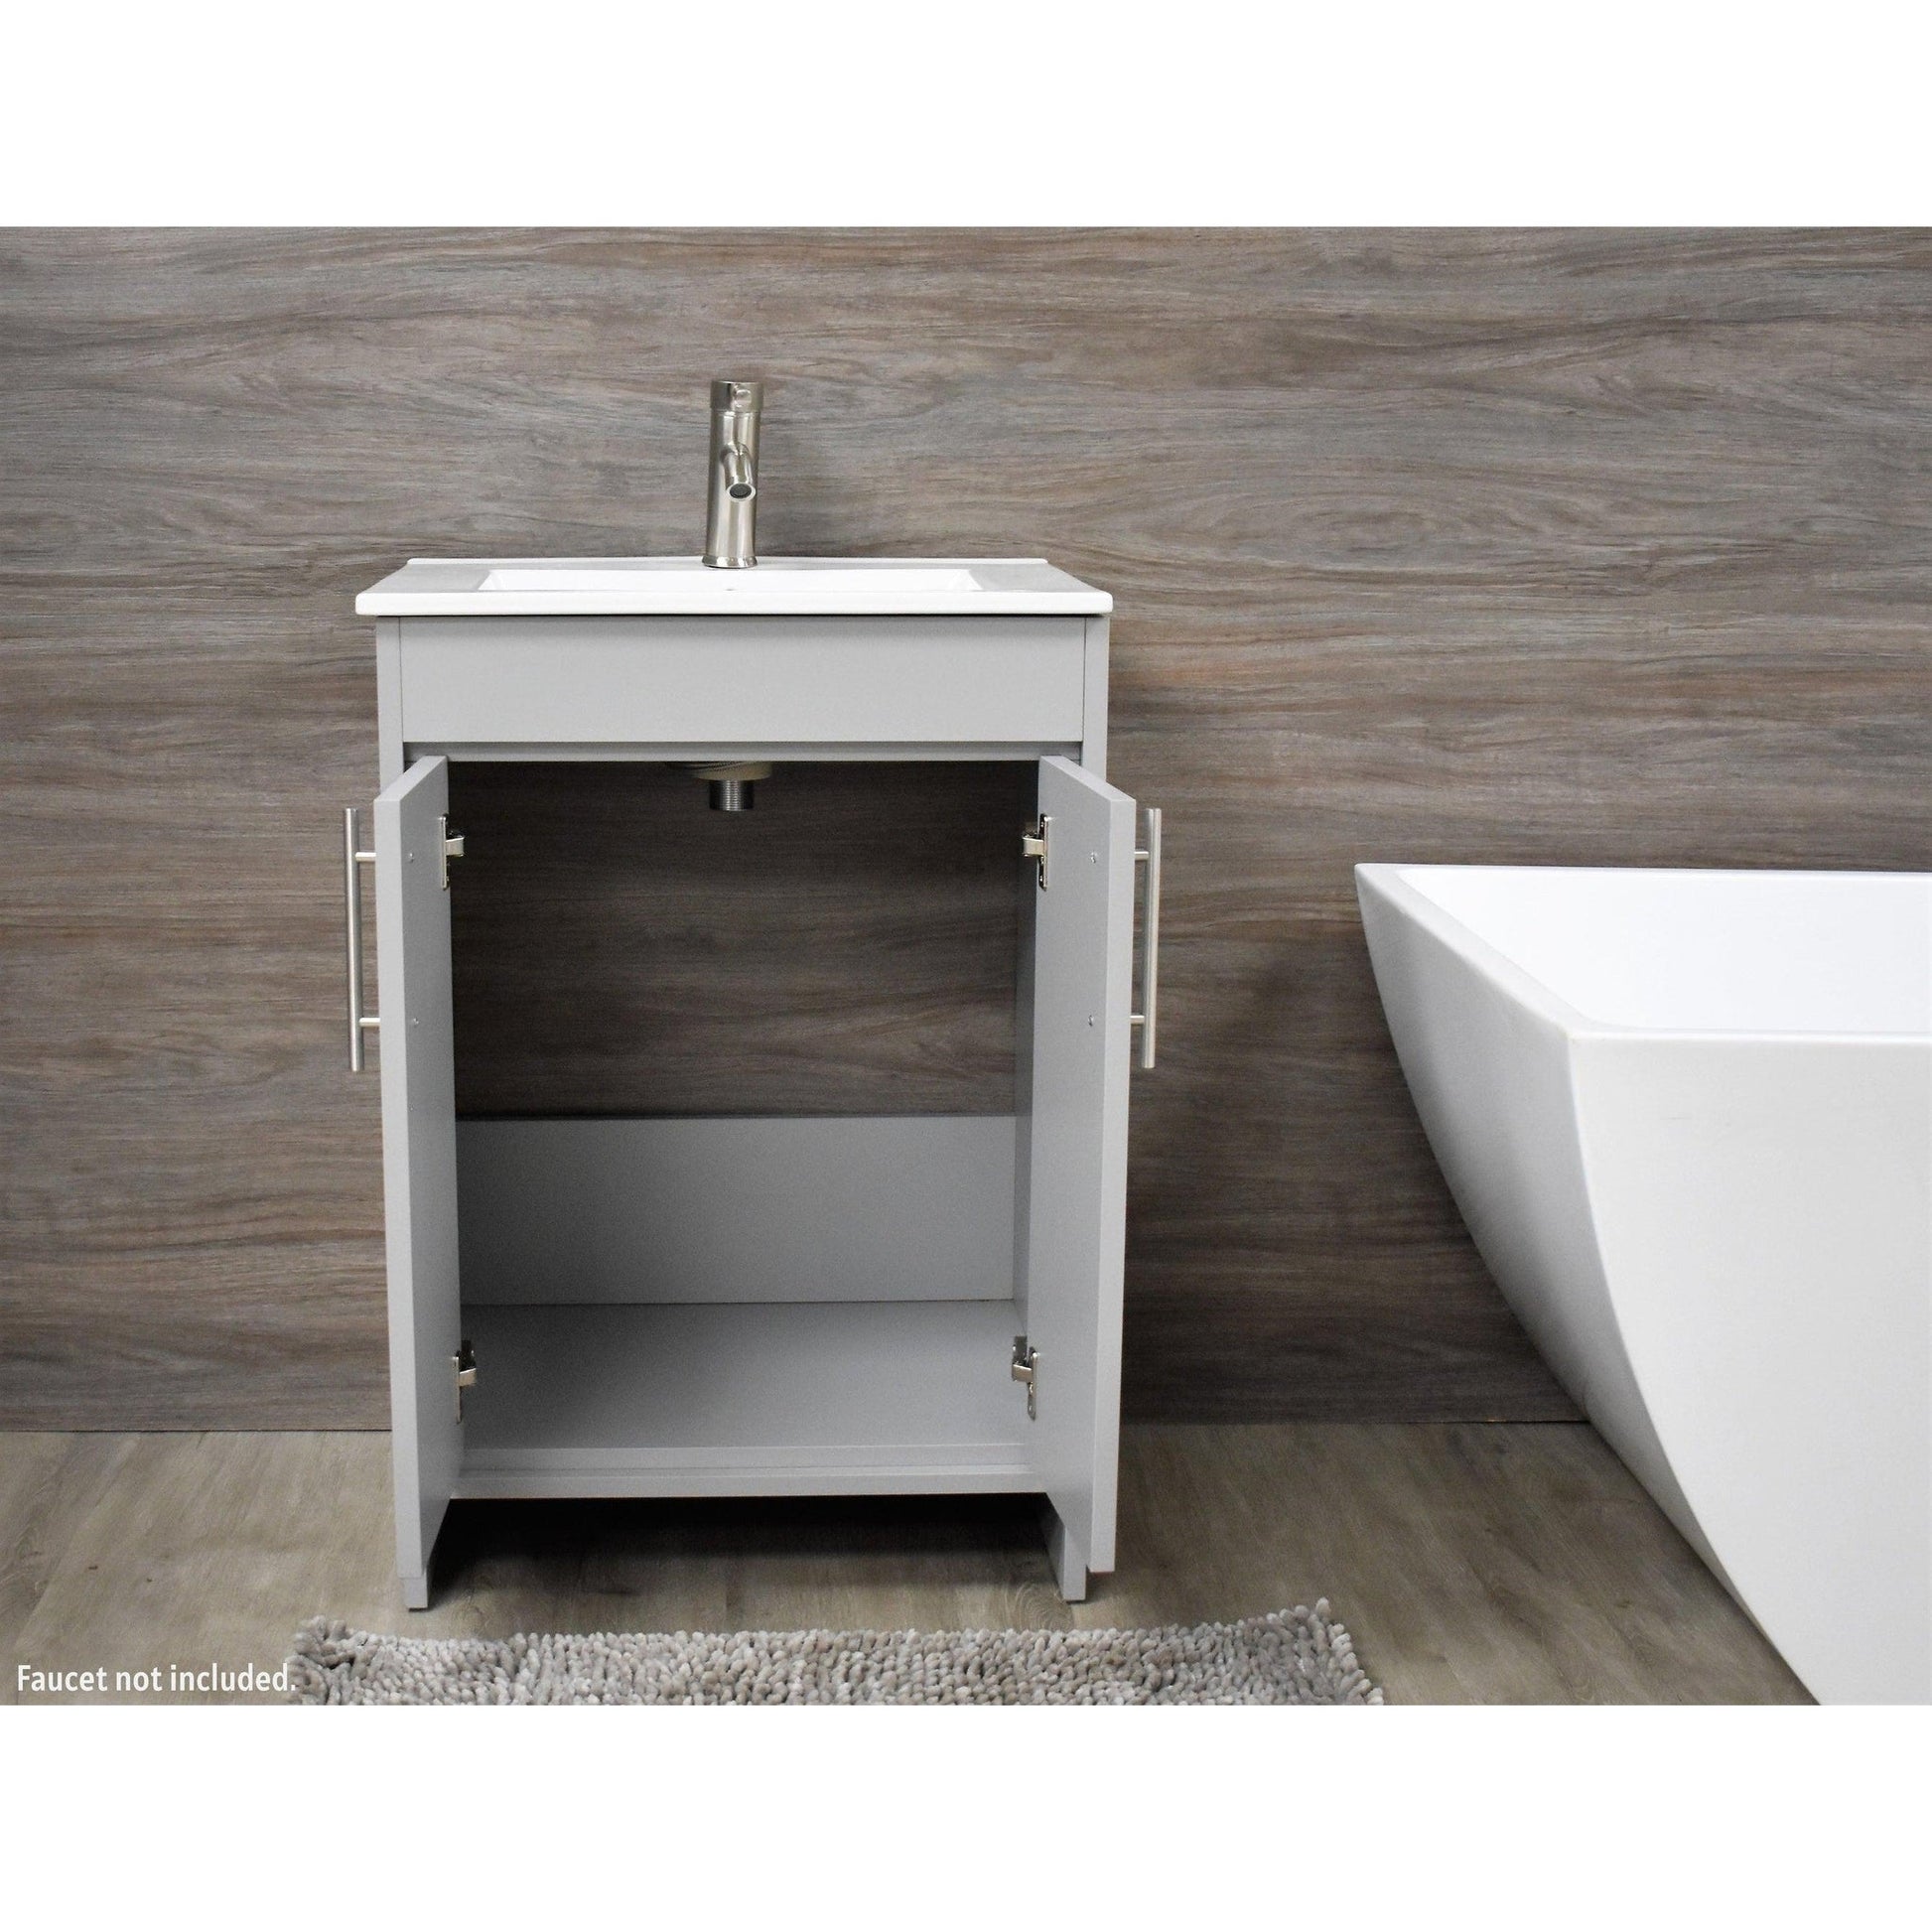 Volpa USA Villa 24" Gray Freestanding Modern Bathroom Vanity With Integrated Ceramic Top and Brushed Nickel Round Handles